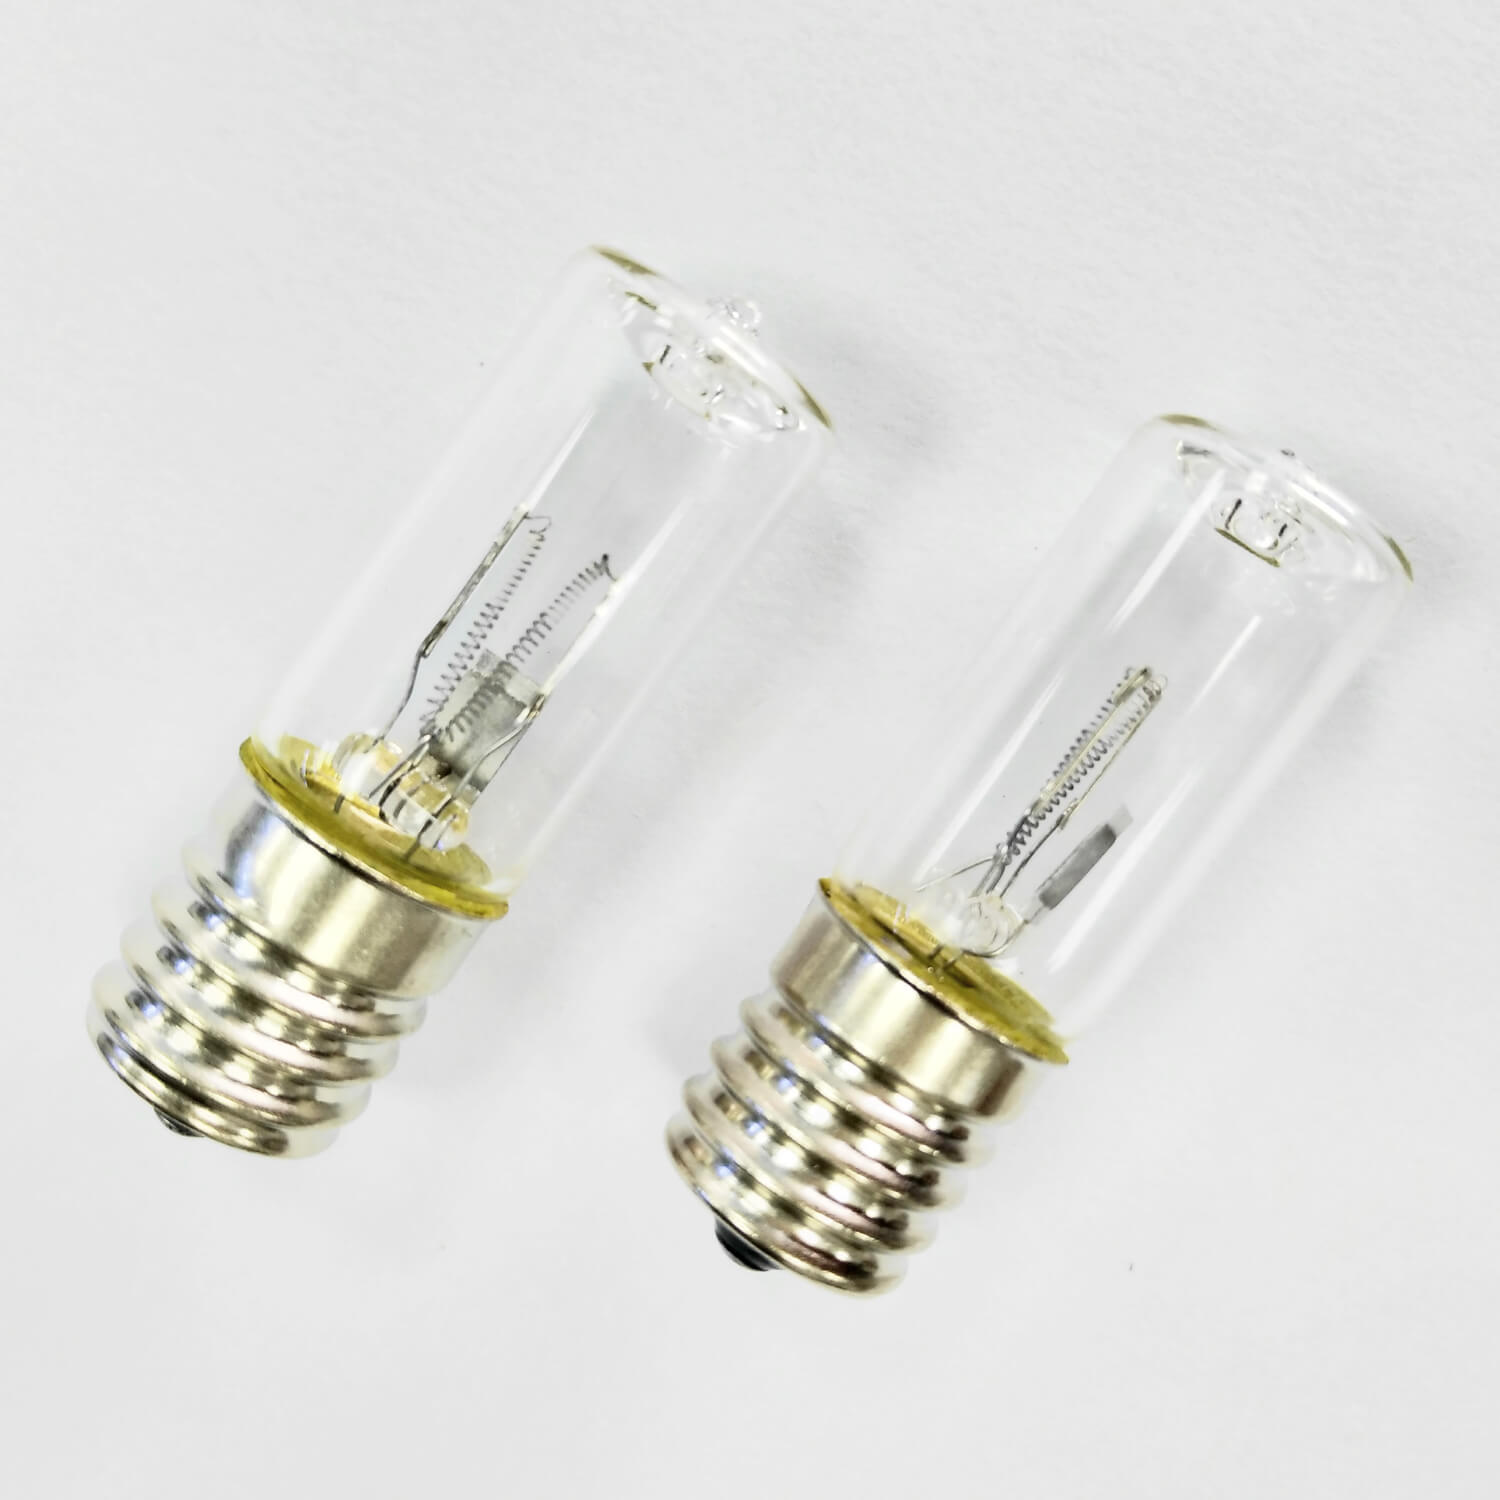 LiangYueLiang uvc ultraviolet germicidal lamp bulbs for underground water recycling-2